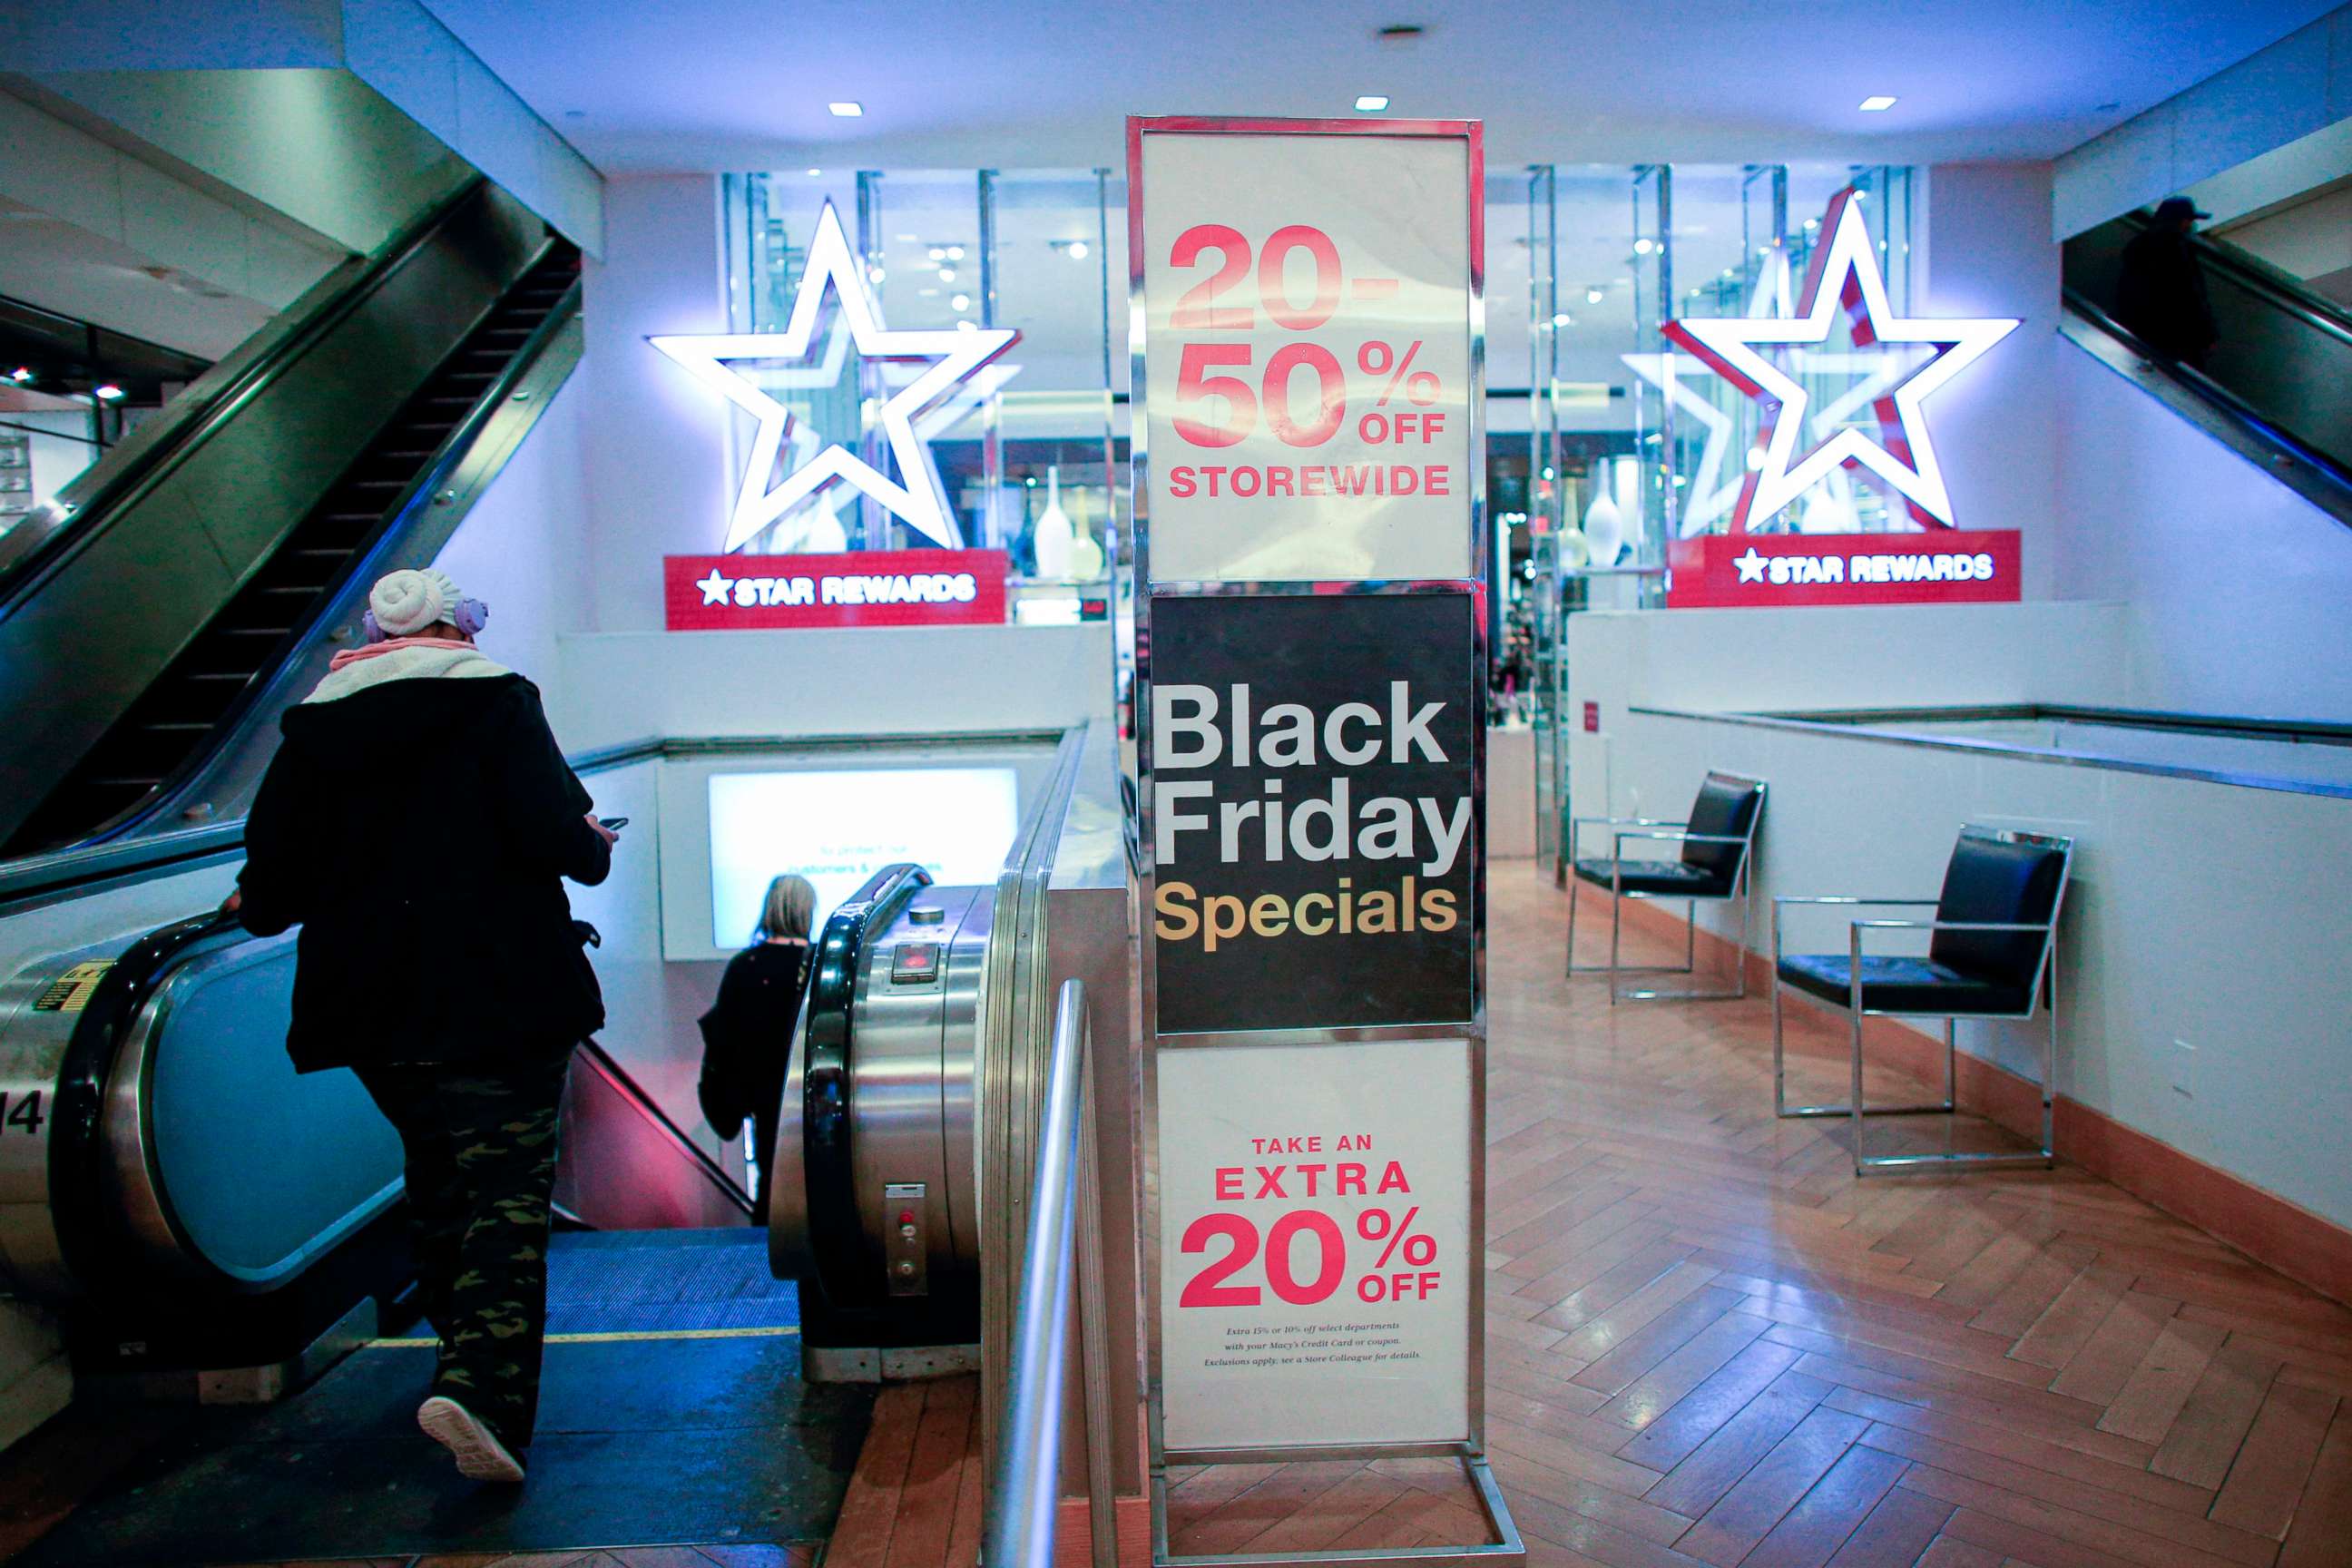 PHOTO: Customers shop at Macys department store in New York on Black Friday, November 27, 2020.